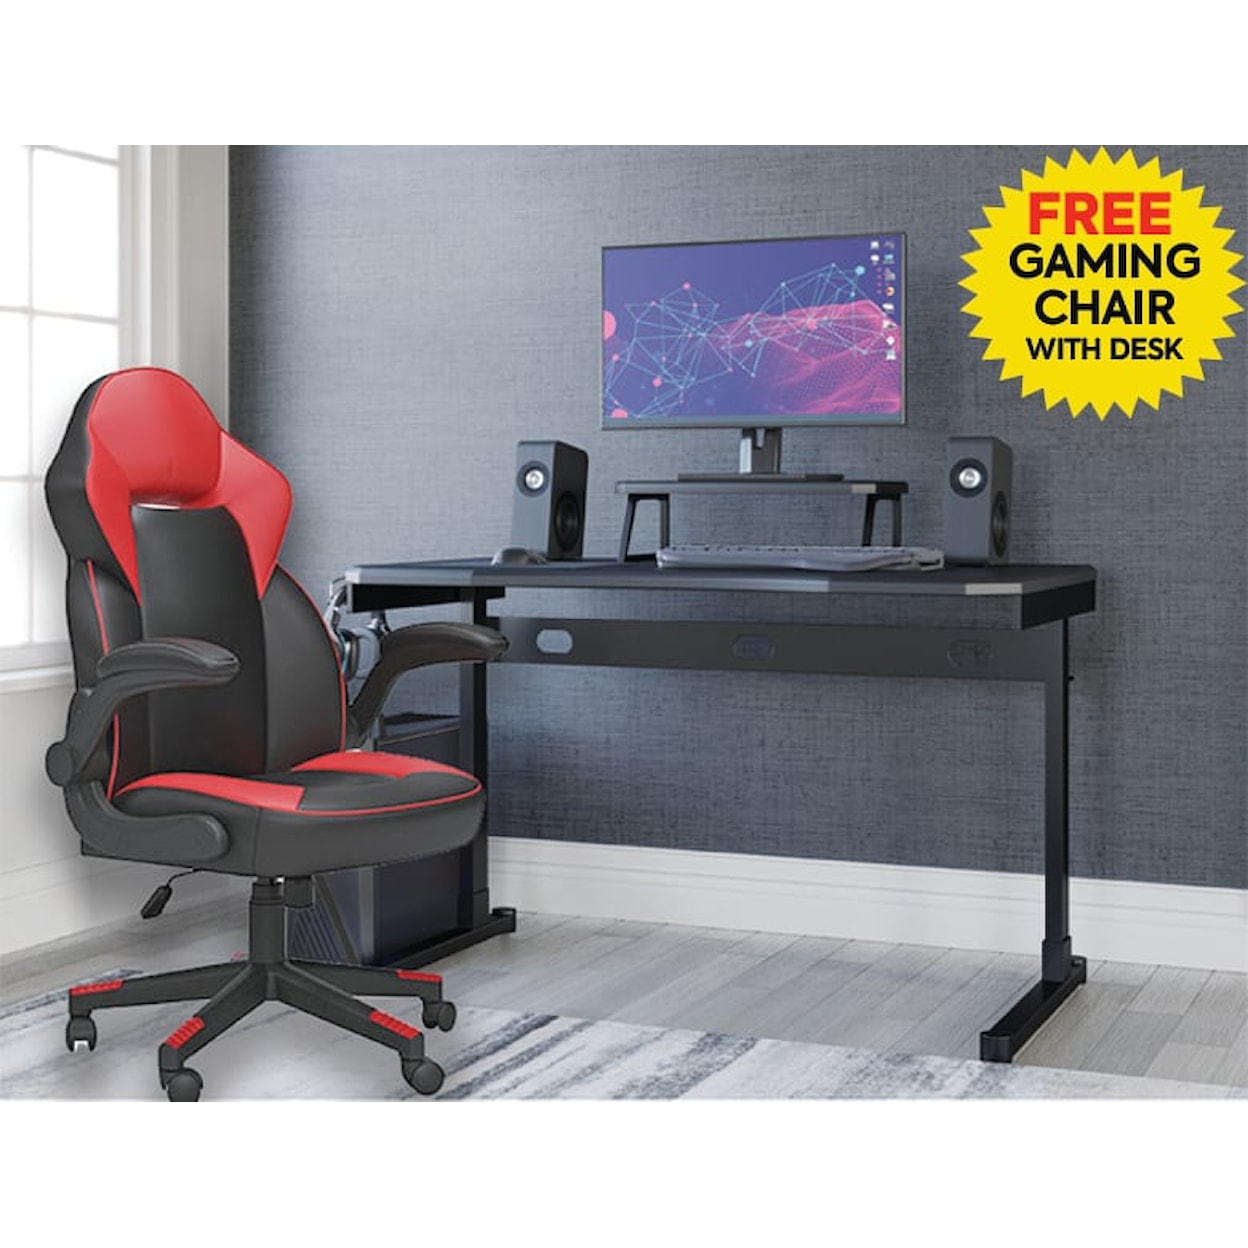 Signature Design by Ashley Lynxtyn Gaming Desk with Free Chair